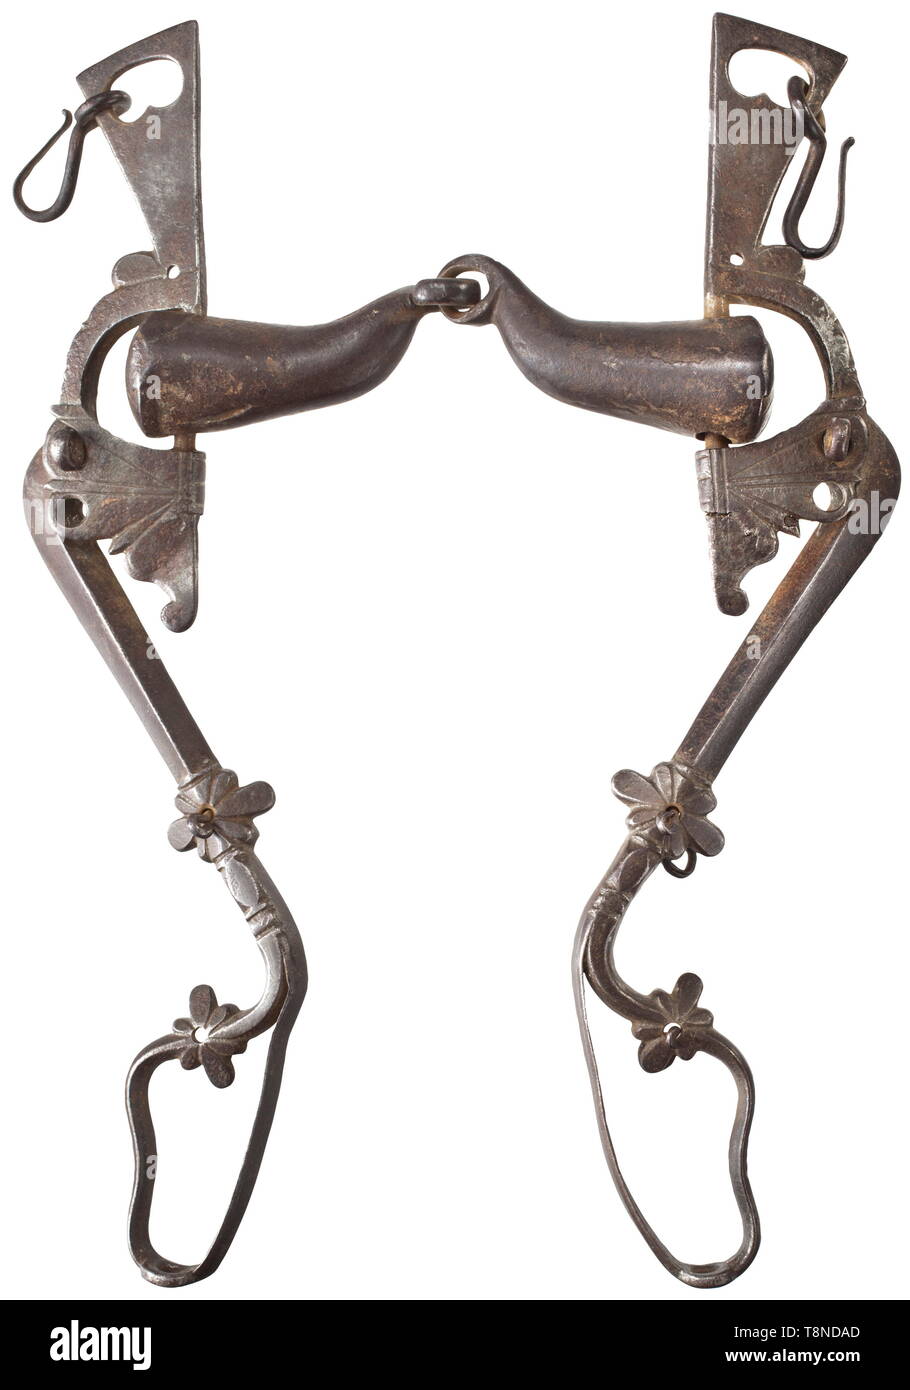 A French snaffle bit, 17th century Wrought iron. Double conical mouth-piece made of two pieces, curved profiled lateral parts with chiselled ornaments. Length 33 cm. historic, historical, 17th century, Additional-Rights-Clearance-Info-Not-Available Stock Photo